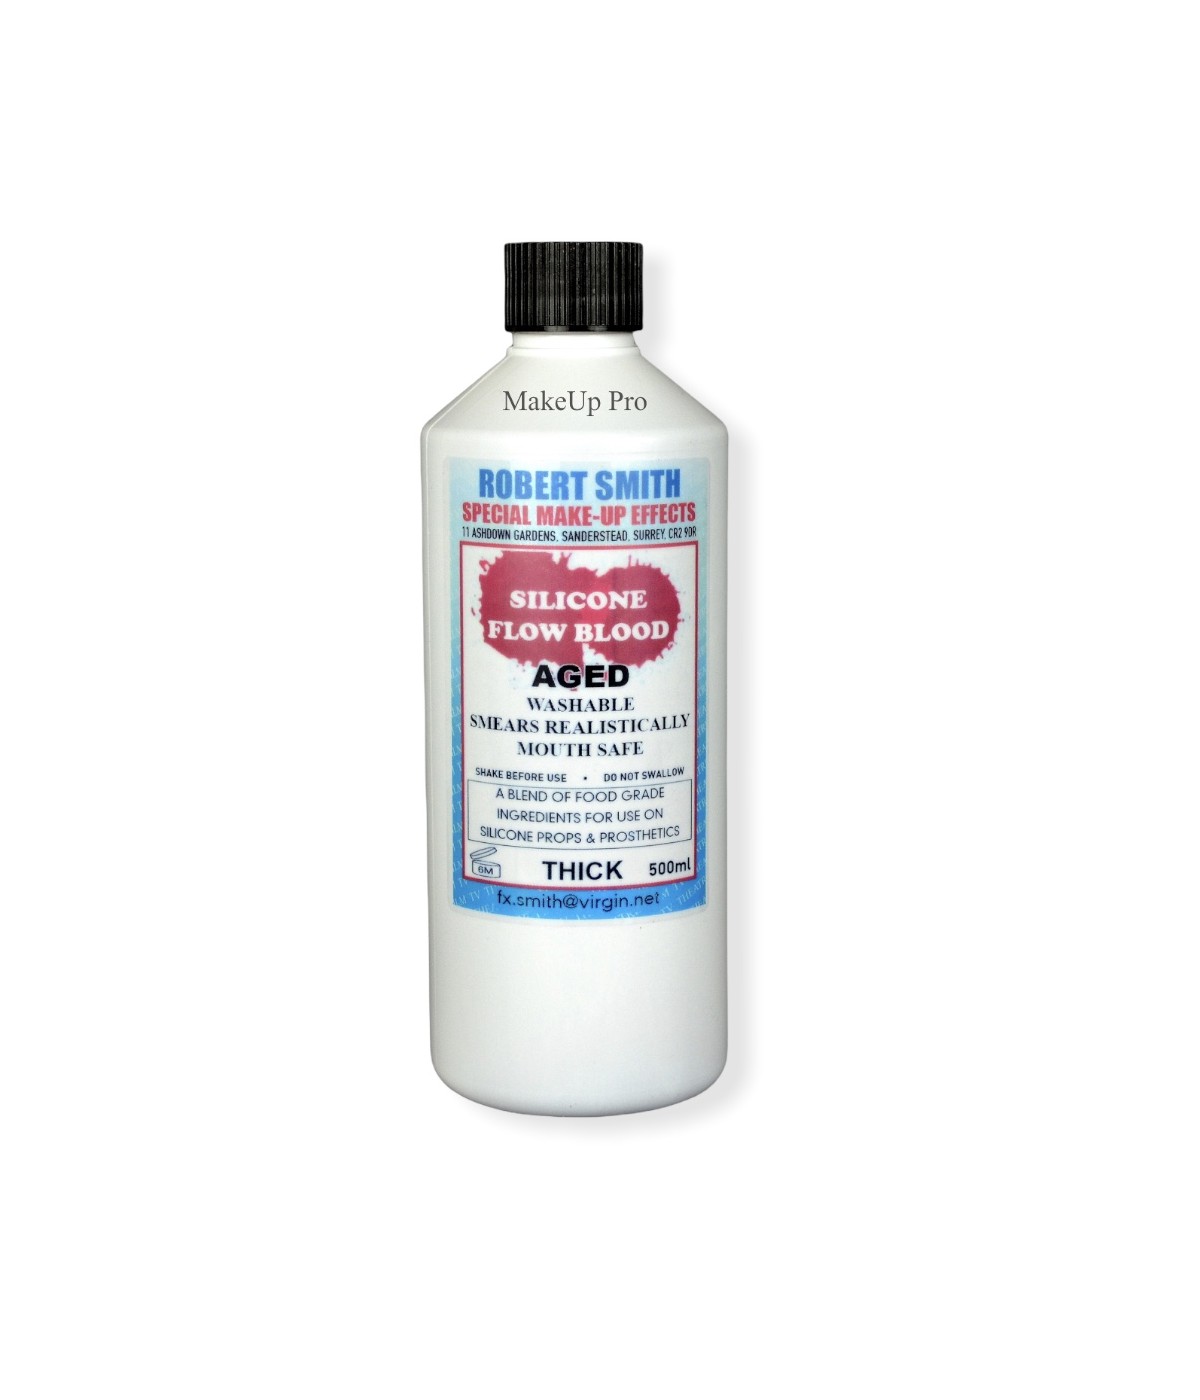 Robert Smith Silicone Flow Blood, THICK 500 g / Aged